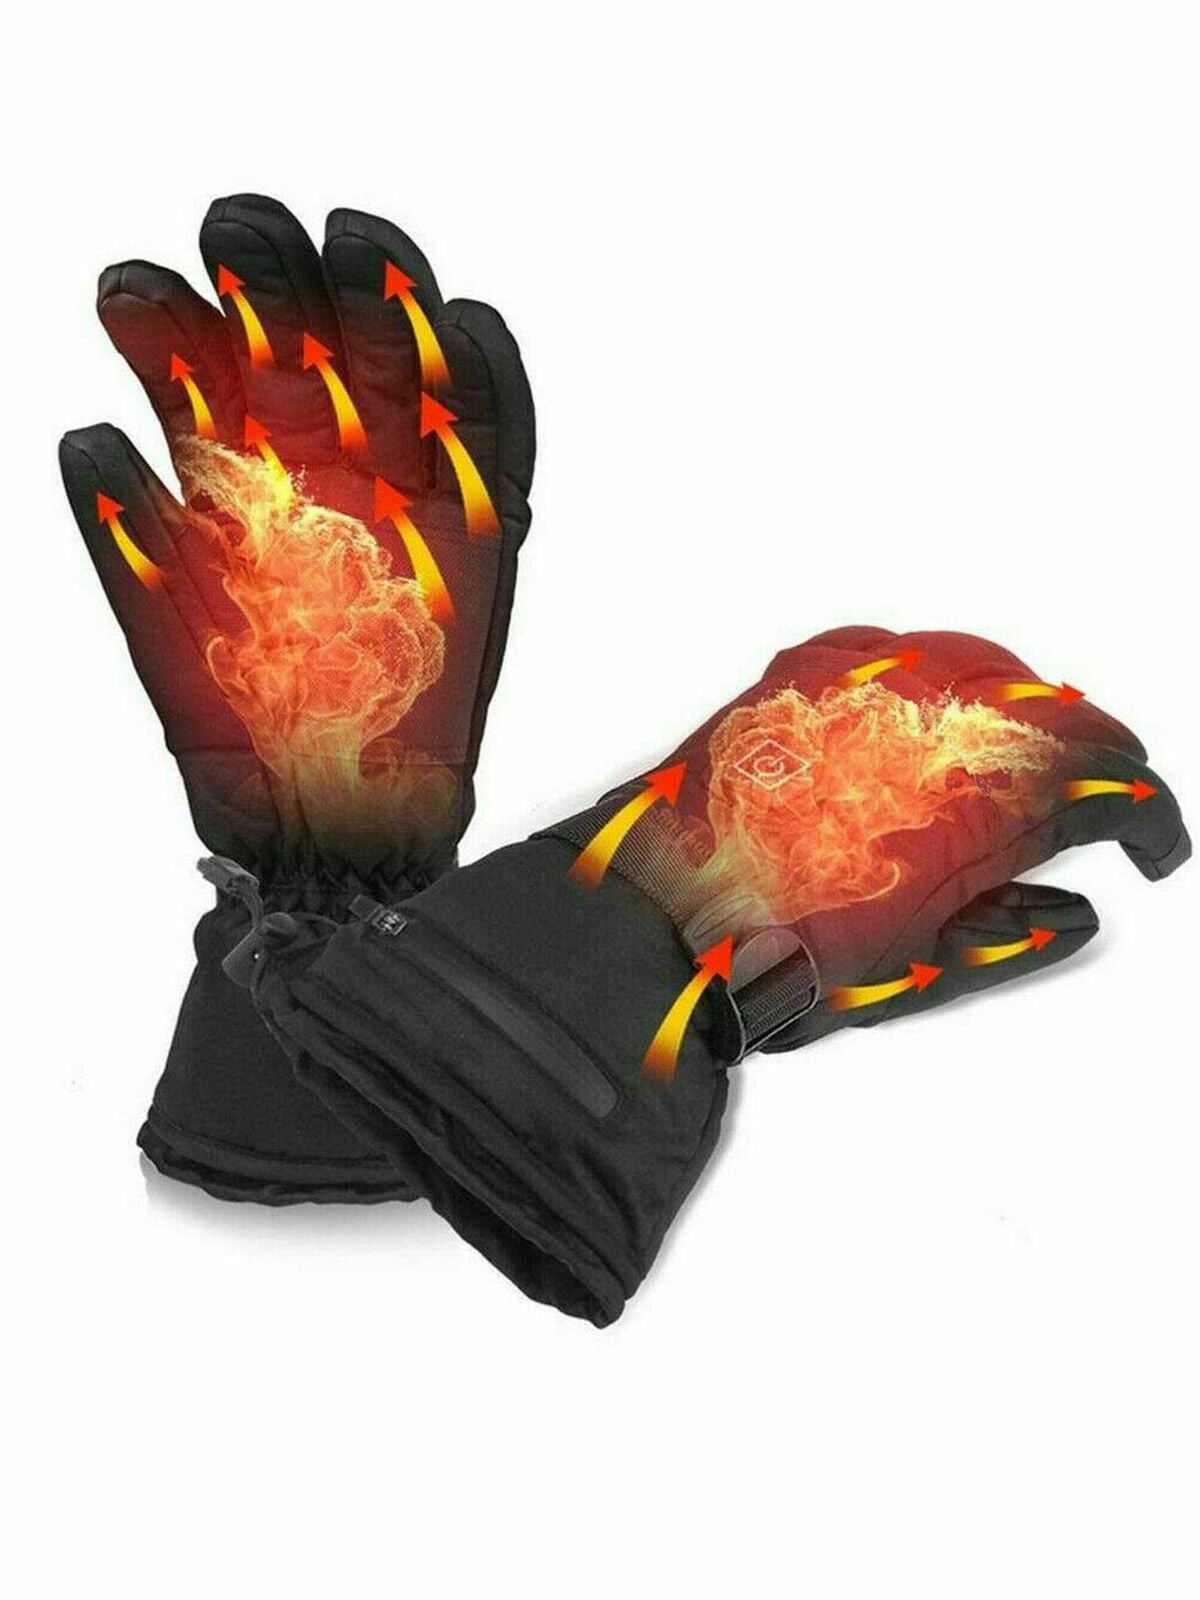 Waterproof Electric Battery Powered Heated Hunting Warmer Gloves Winter Warm New 